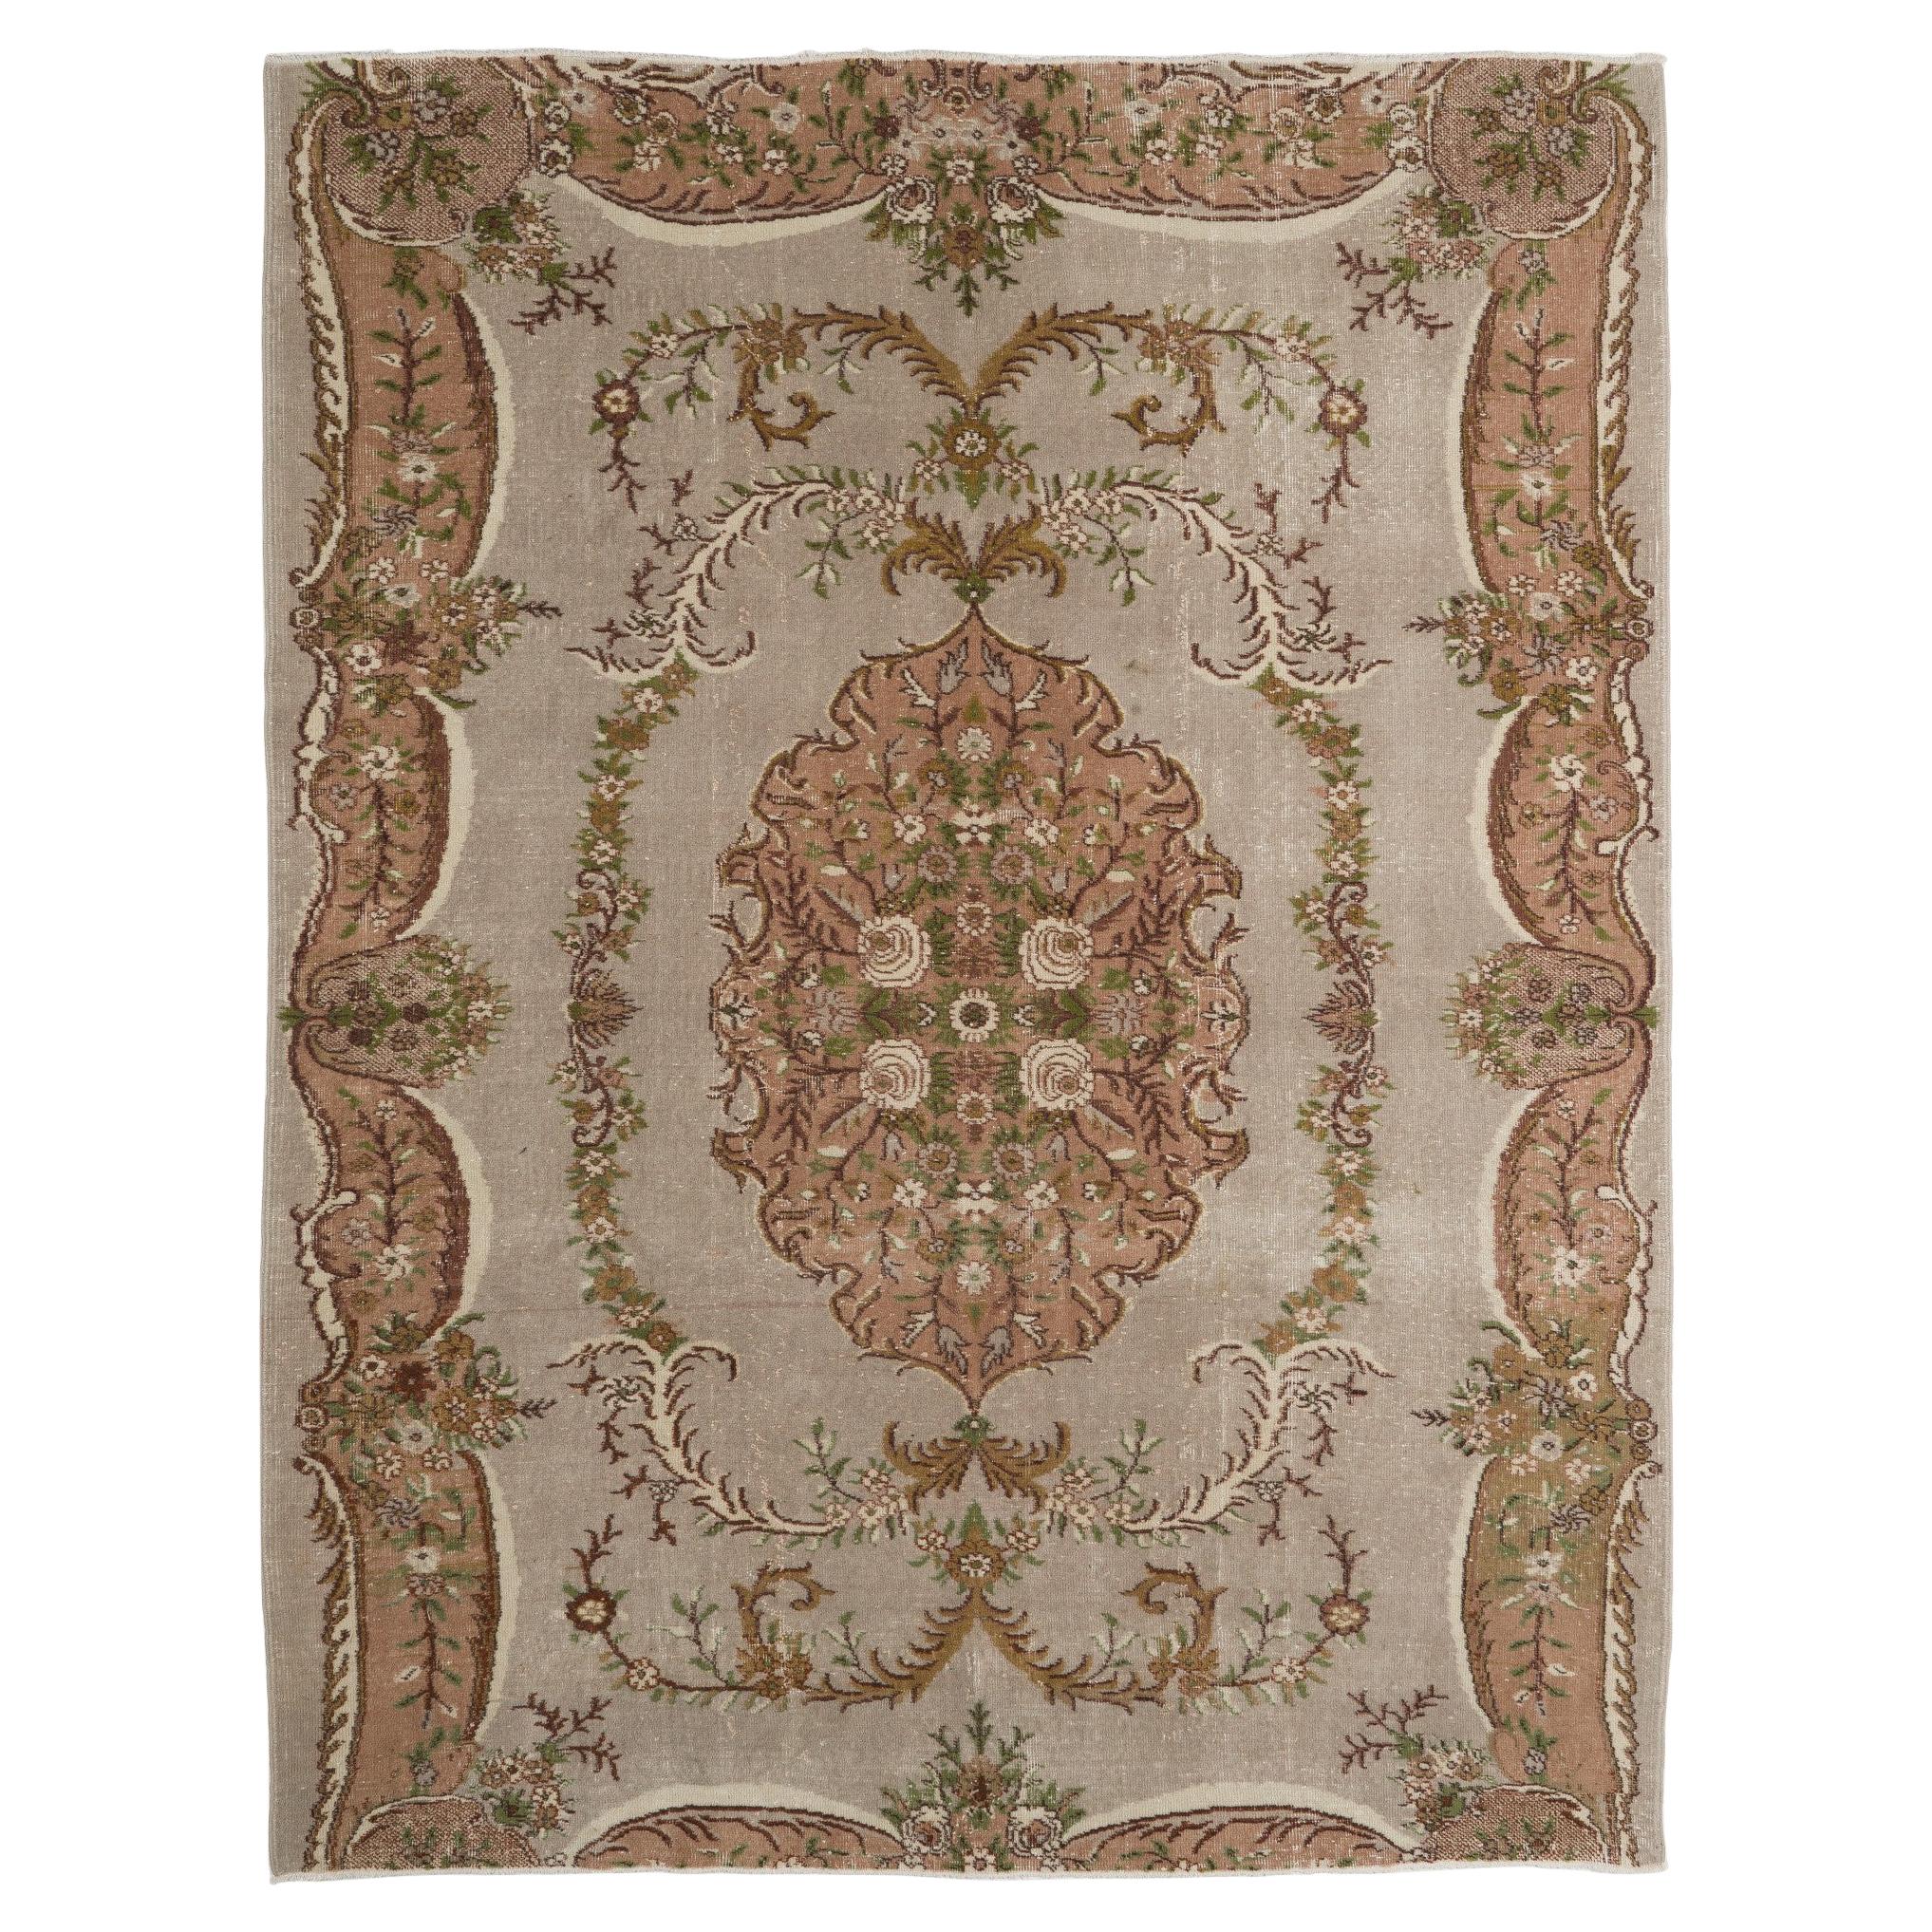 7x9 Ft Aubusson Inspired Vintage Turkish Handmade Wool Rug in Faded Rose, Gray For Sale